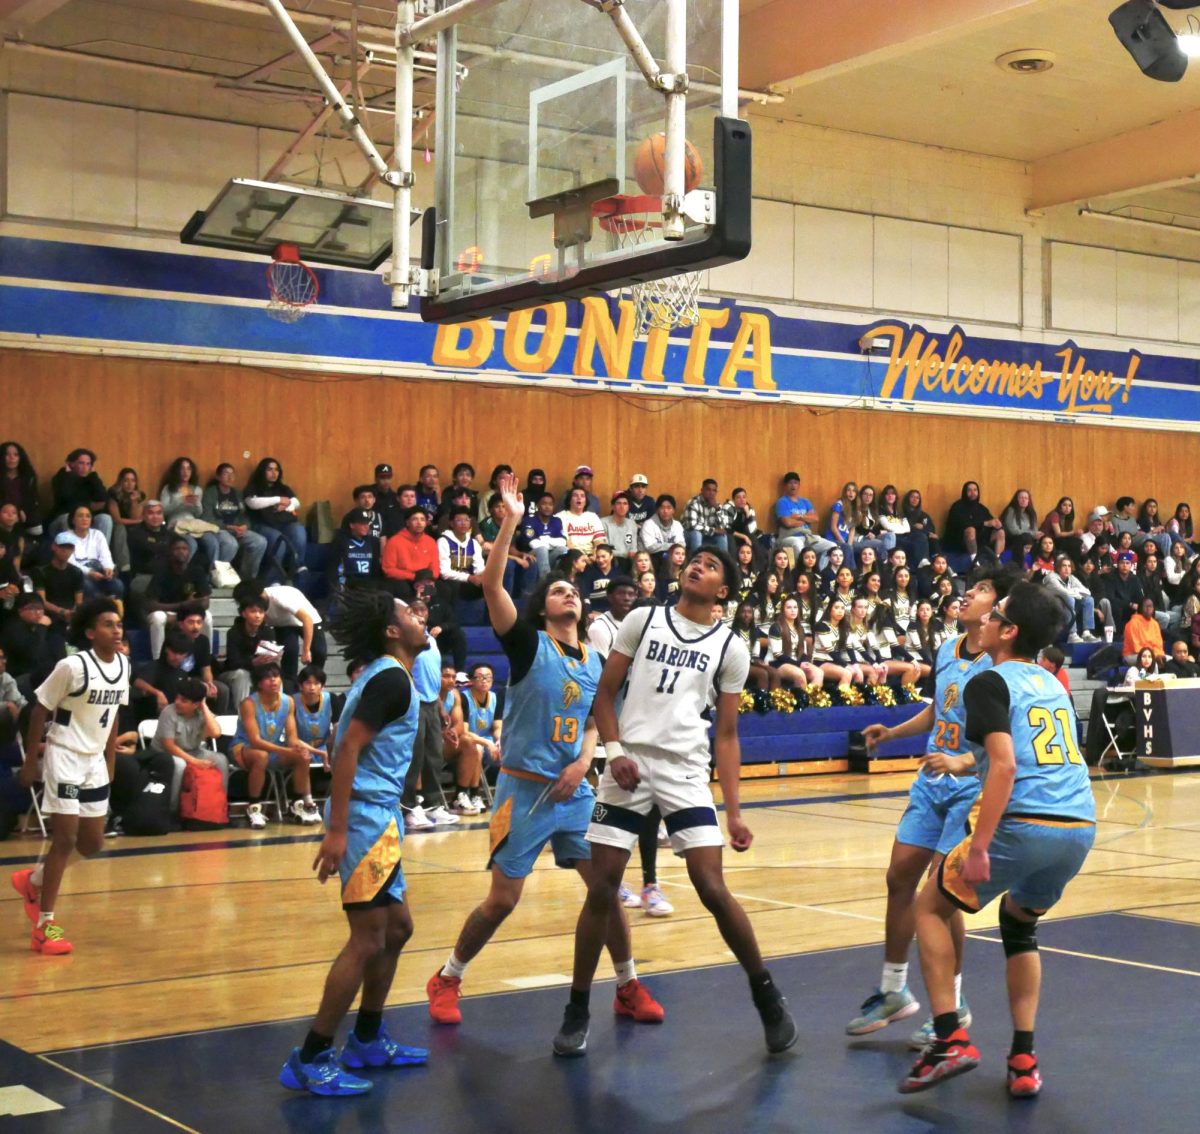 On Jan. 19, the Bonita Vista High (BVH) Barons boys varisty basketball team outplayed their league rivals, the San Ysidro High (SYH) Cougars in a 70-51 victory. Early in the game, BVH small forward and senior Torrean Smalley (11) maneuvers the ball past four defenders and makes a layup that increases the Barons lead over the Cougars.